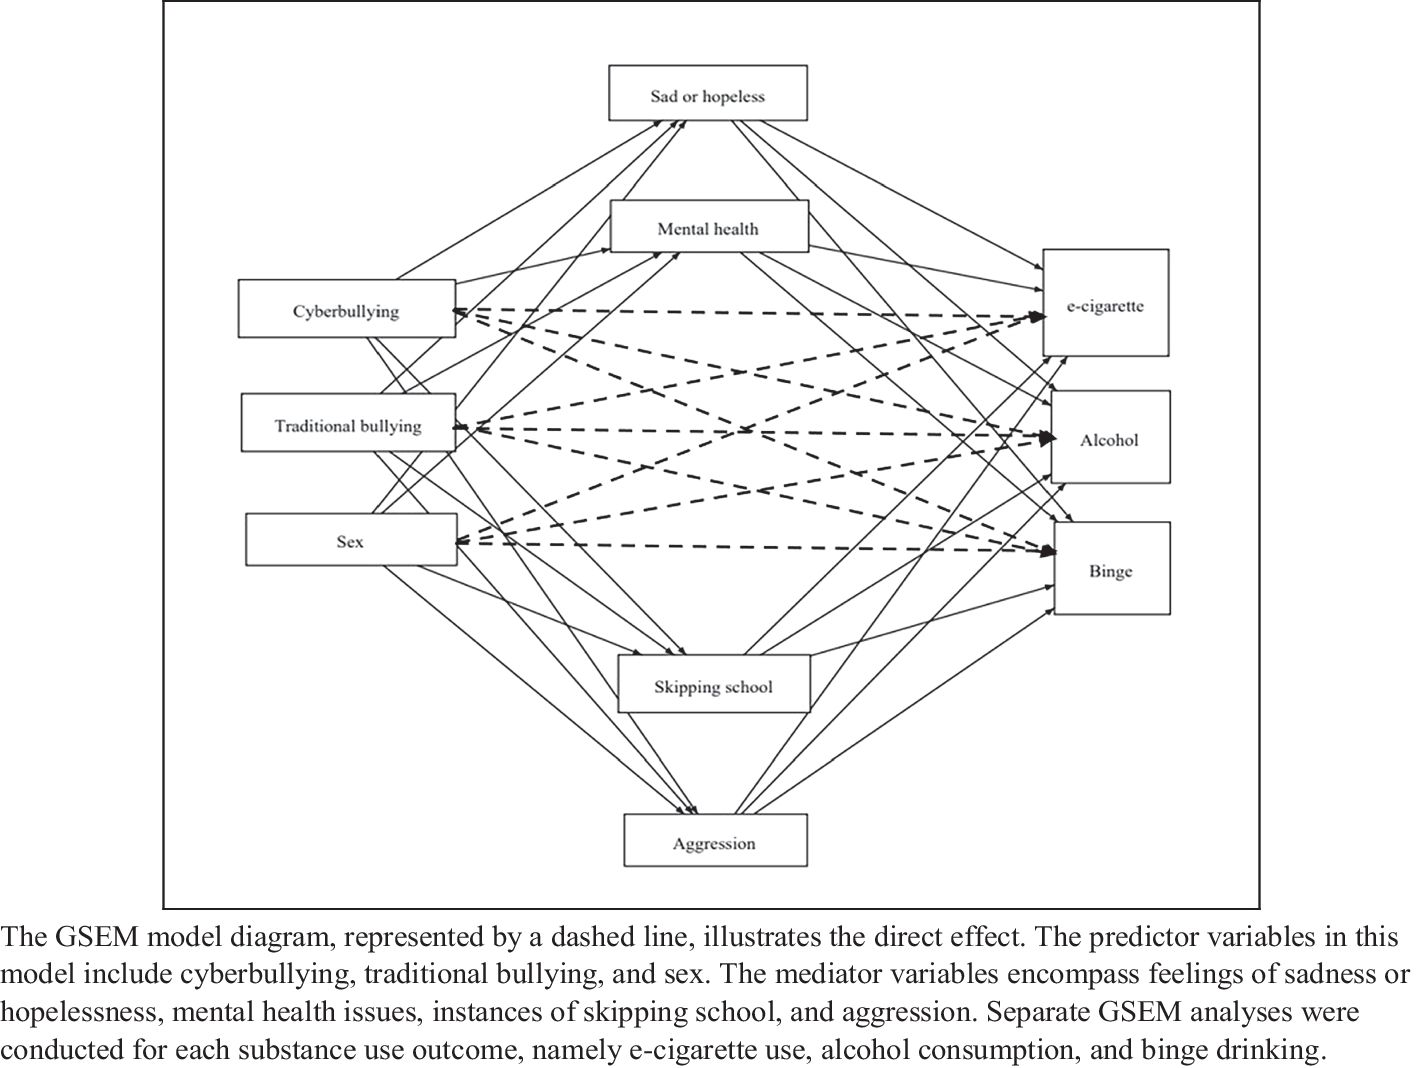 Mediators of Bullying Victimization and Substance Use Among US High School Students